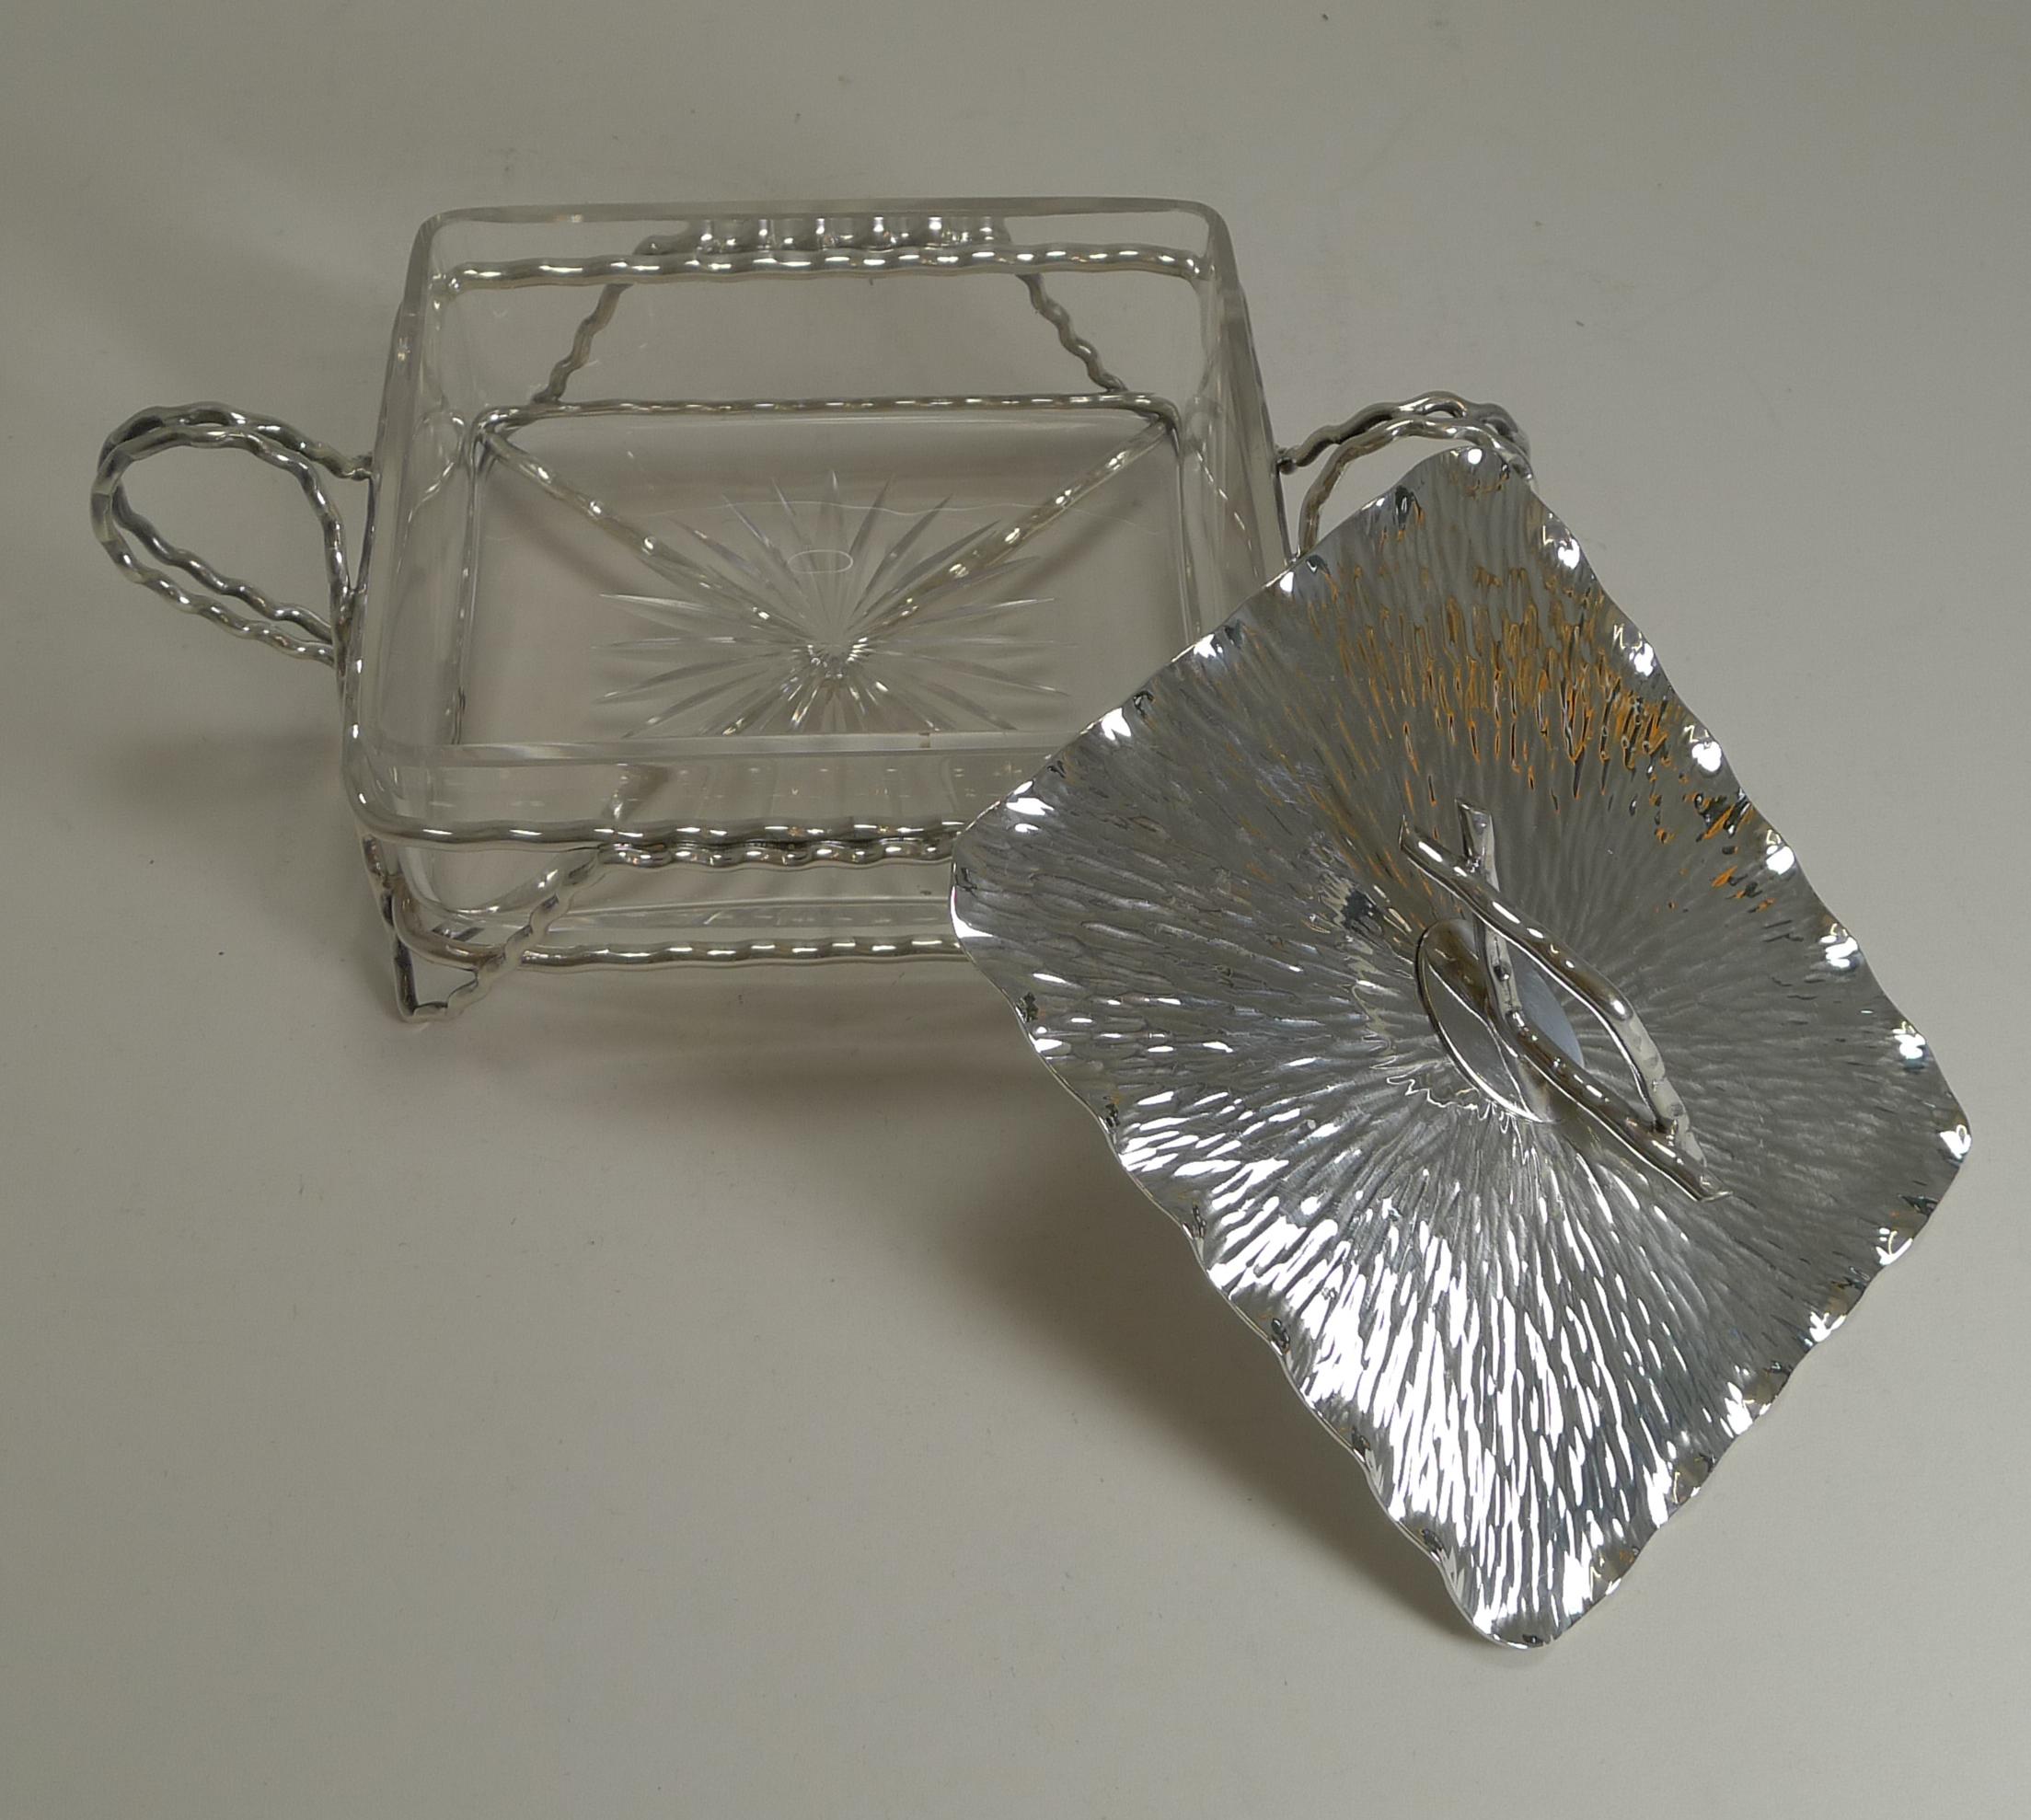 A wonderful example of a Victorian naturalistic piece attributed to Christopher Dresser and made by the famous silversmiths, Hukin and Heath.

The original glass liner remains intact and without damage.

Fully marked and in excellent condition.